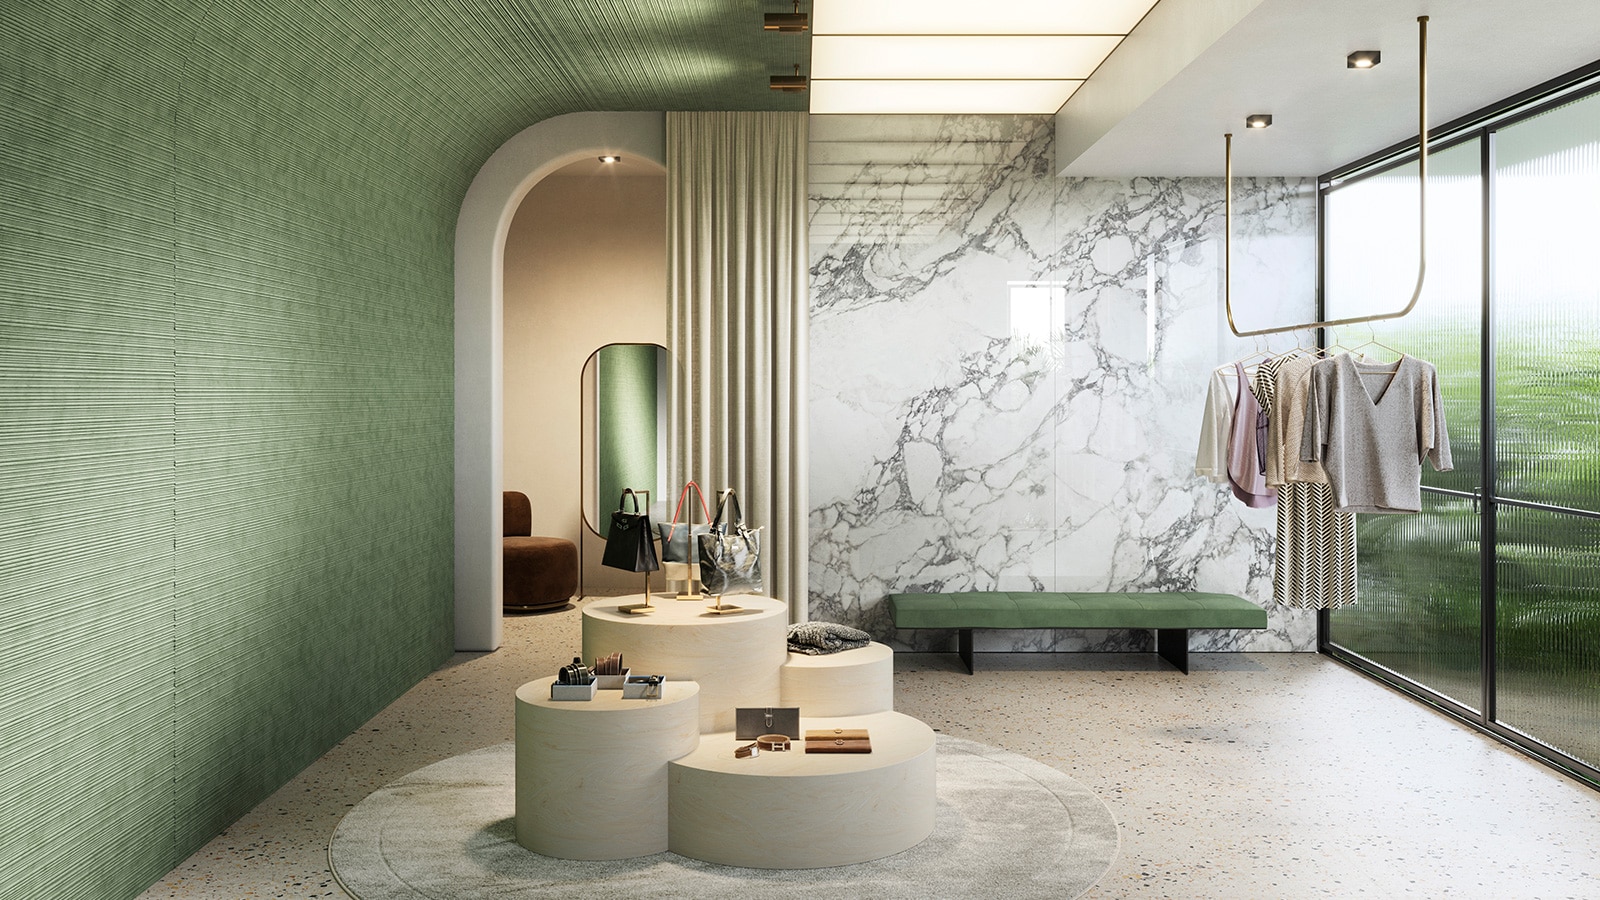 The main trends in interior design for 2023 by PORCELANOSA